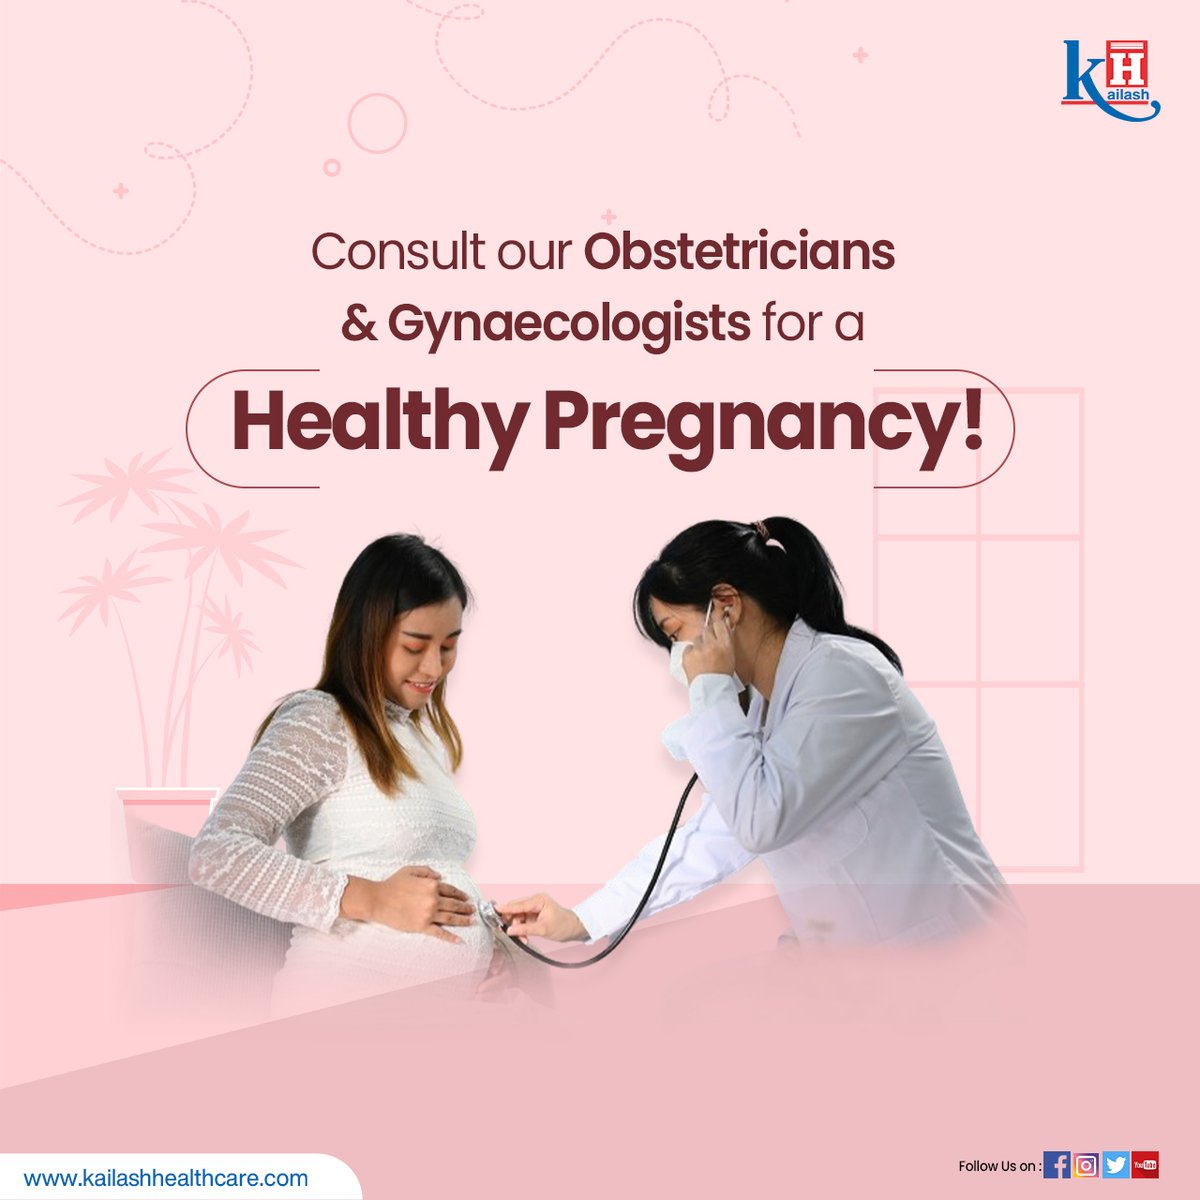 Taking prenatal vitamins during pregnancy is crucial for the health of both the mother and the baby. Make sure to consult with your healthcare provider to ensure you are getting the nutrients you need! 
Consult our Experts today : shorturl.at/hQSZ7

#PrenatalVitamins